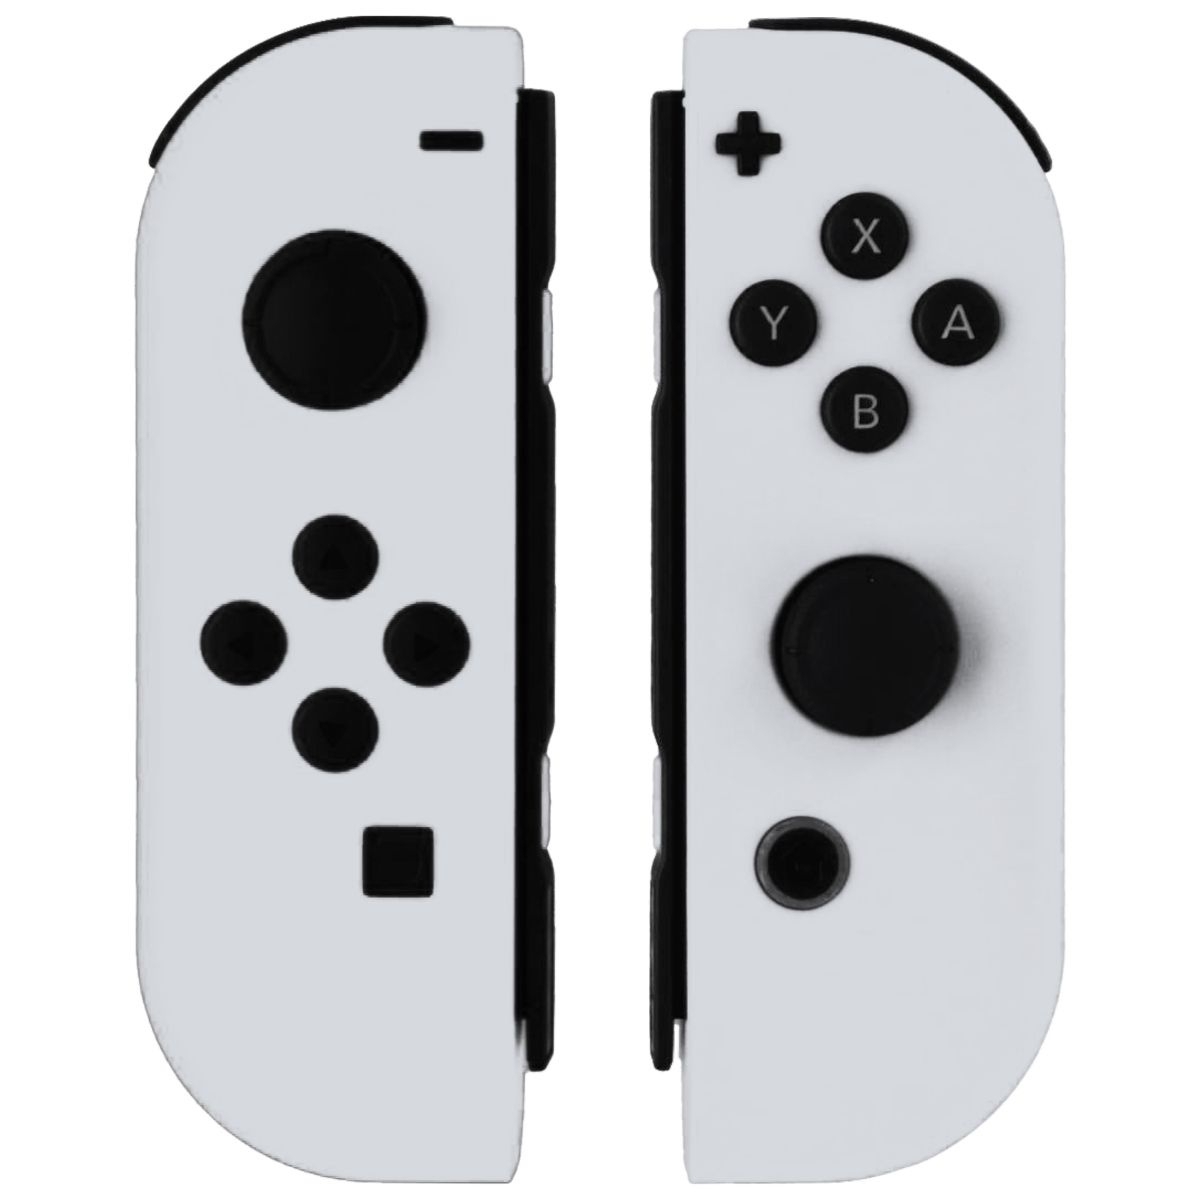 Nintendo Switch Joy-Con Controllers (Left And Right) - White